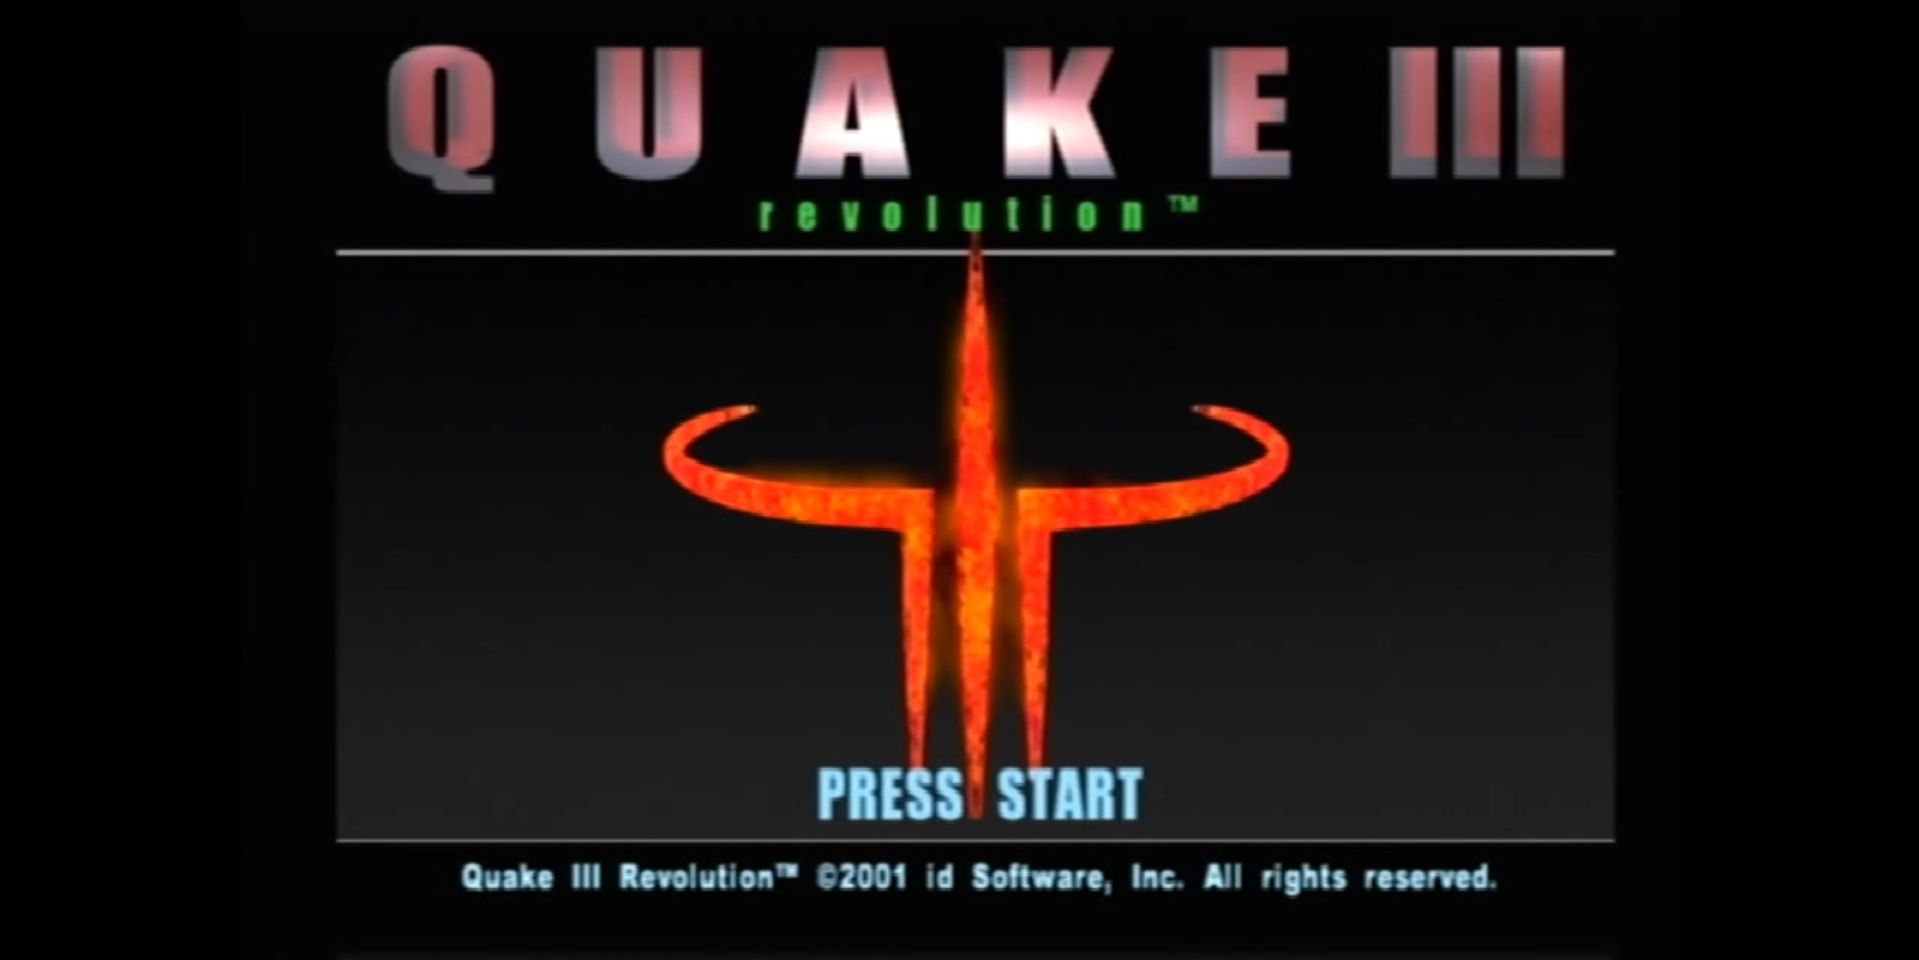 The main menu screen from Quake 3 Revolution on the PS2